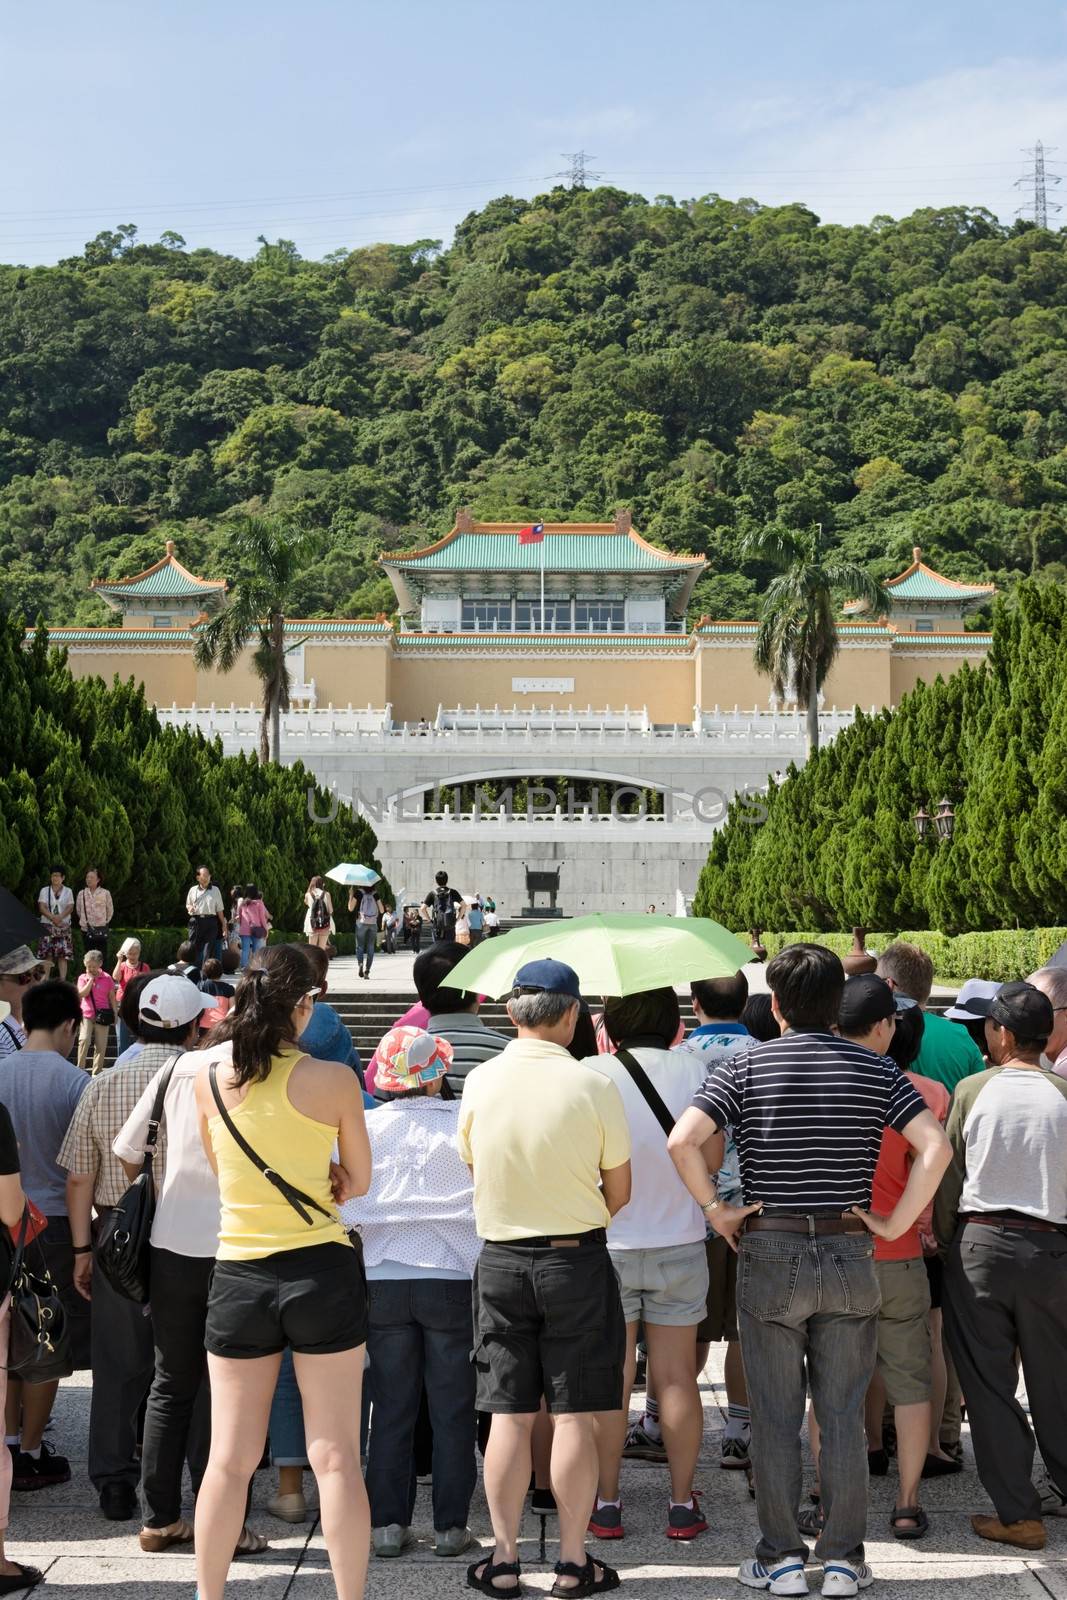 TAIPEI, TAIWAN - SEPTEMBER 4 : Many tourist people stand at the square in front of Taipei's National Palace Museum on September 4, 2013 in Taipei, Taiwan, Asia.